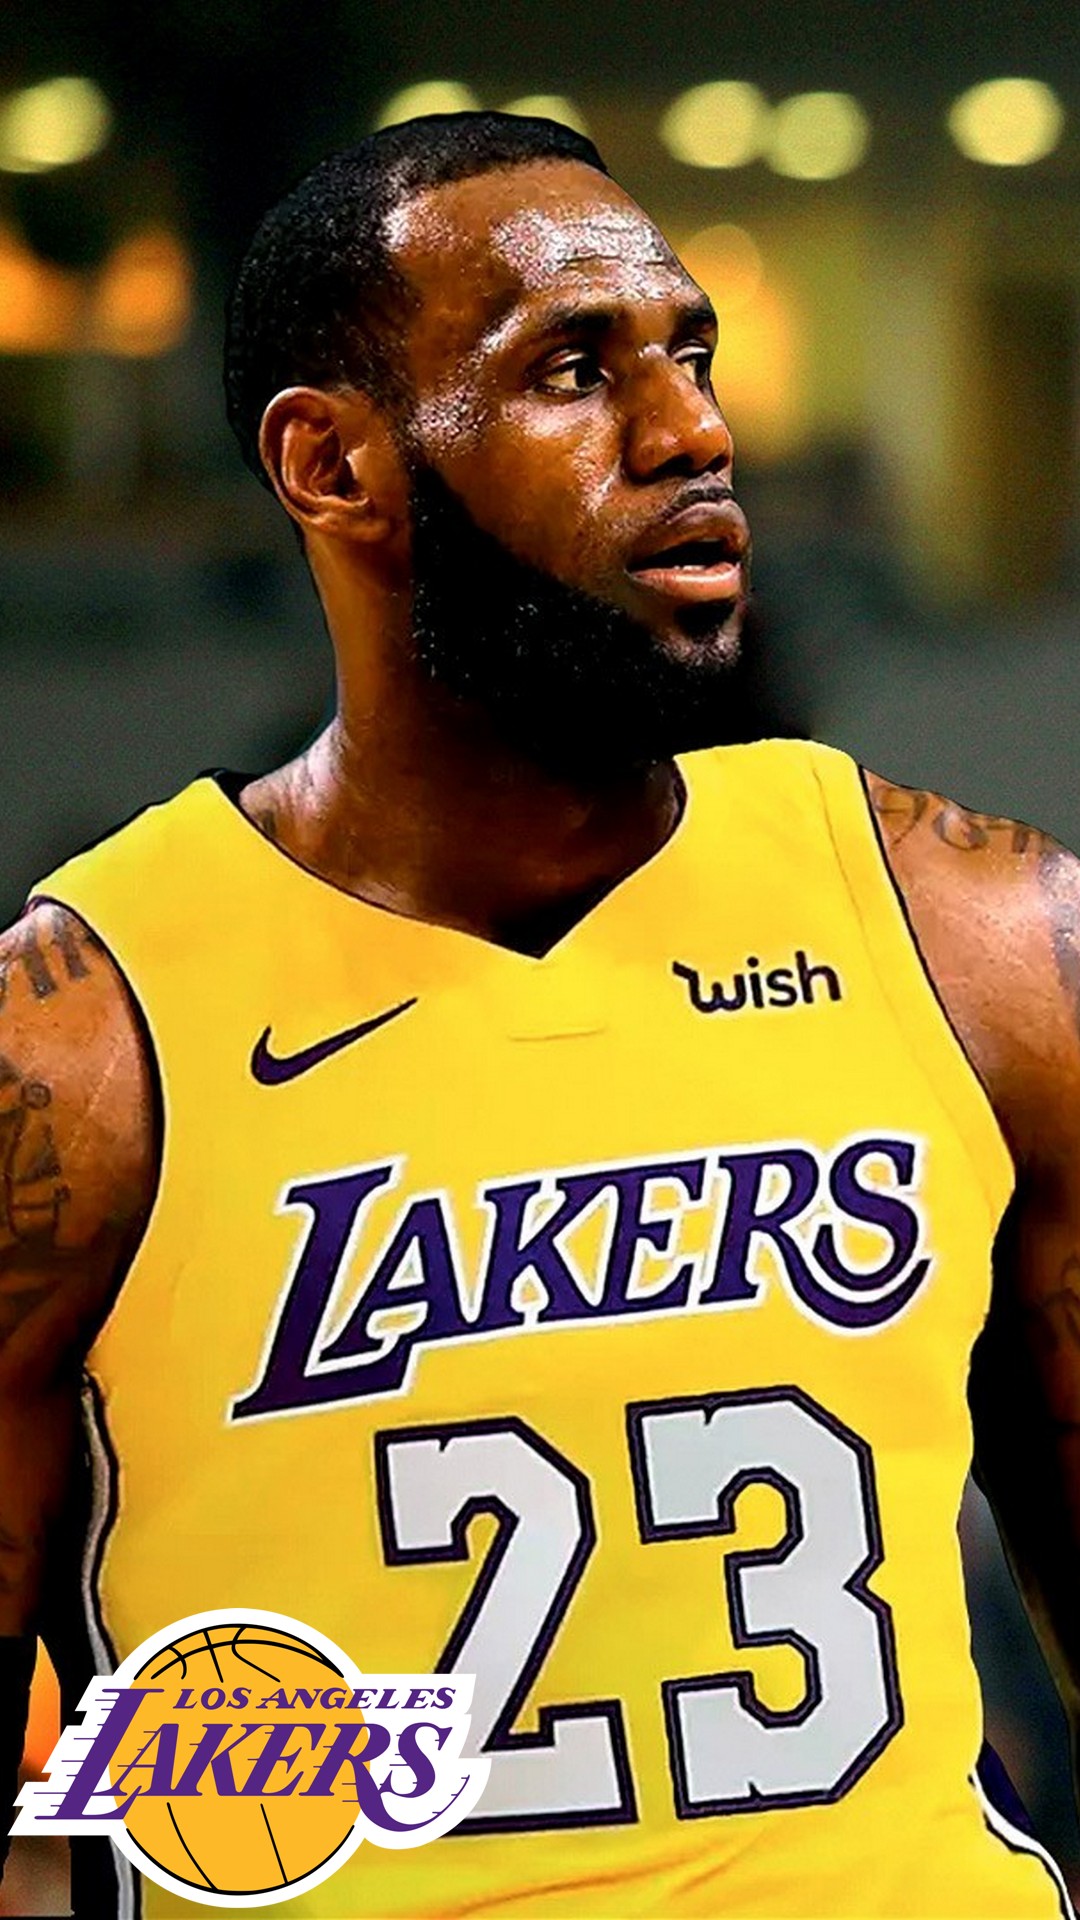 Lebron James Lakers Iphone 6 Wallpaper With Image Dimensions - Iphone 6 Wallpaper  Lebron James - 1080x1920 Wallpaper 